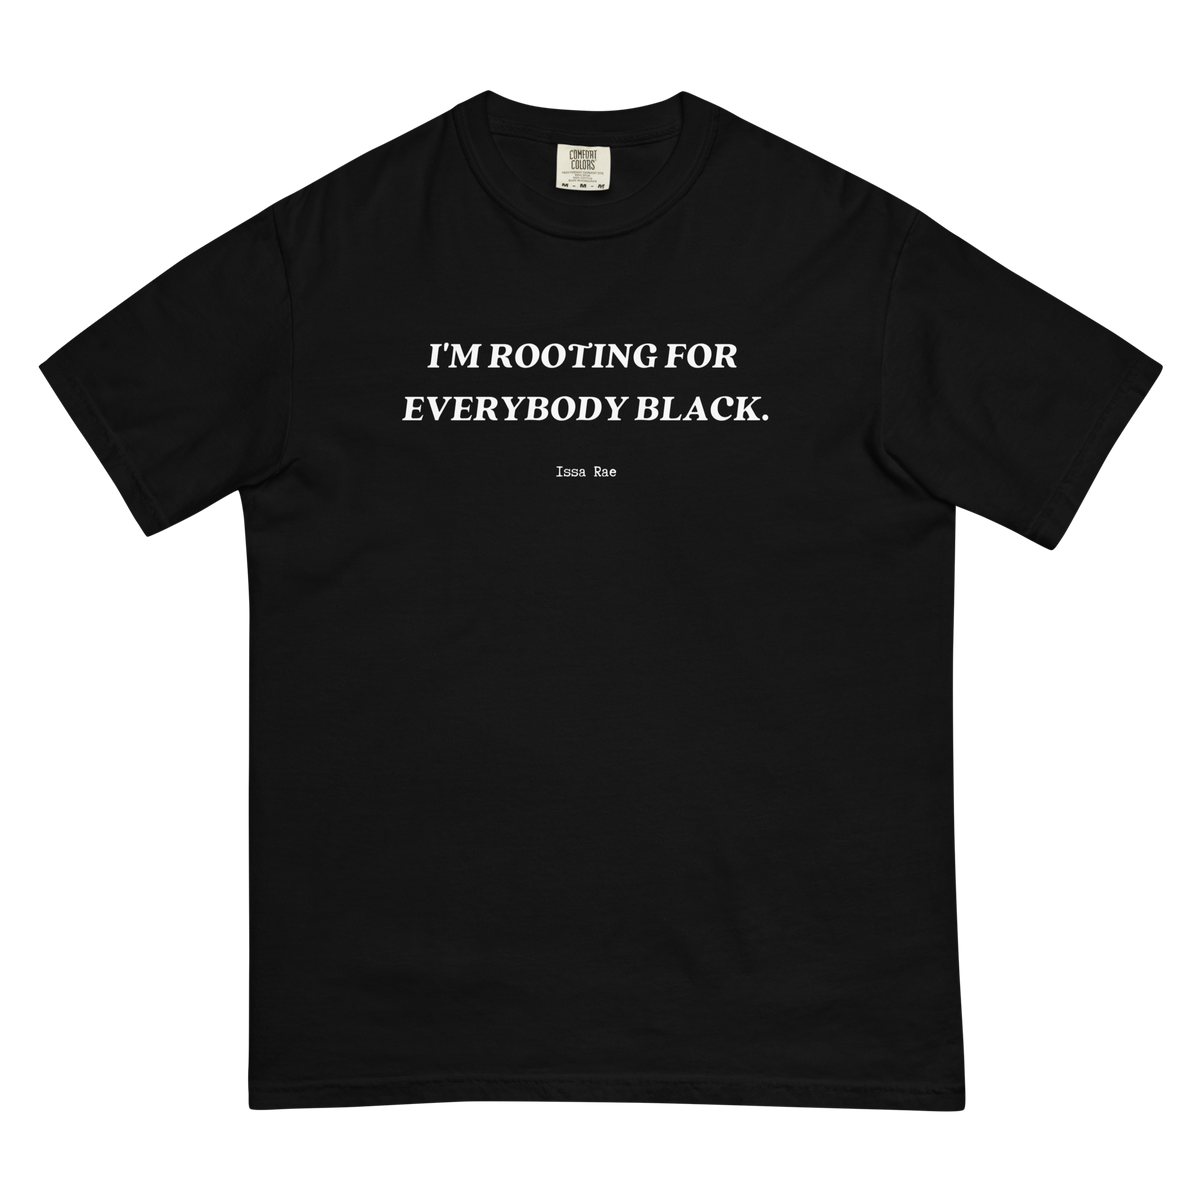 Rooting for Everybody Black Tee